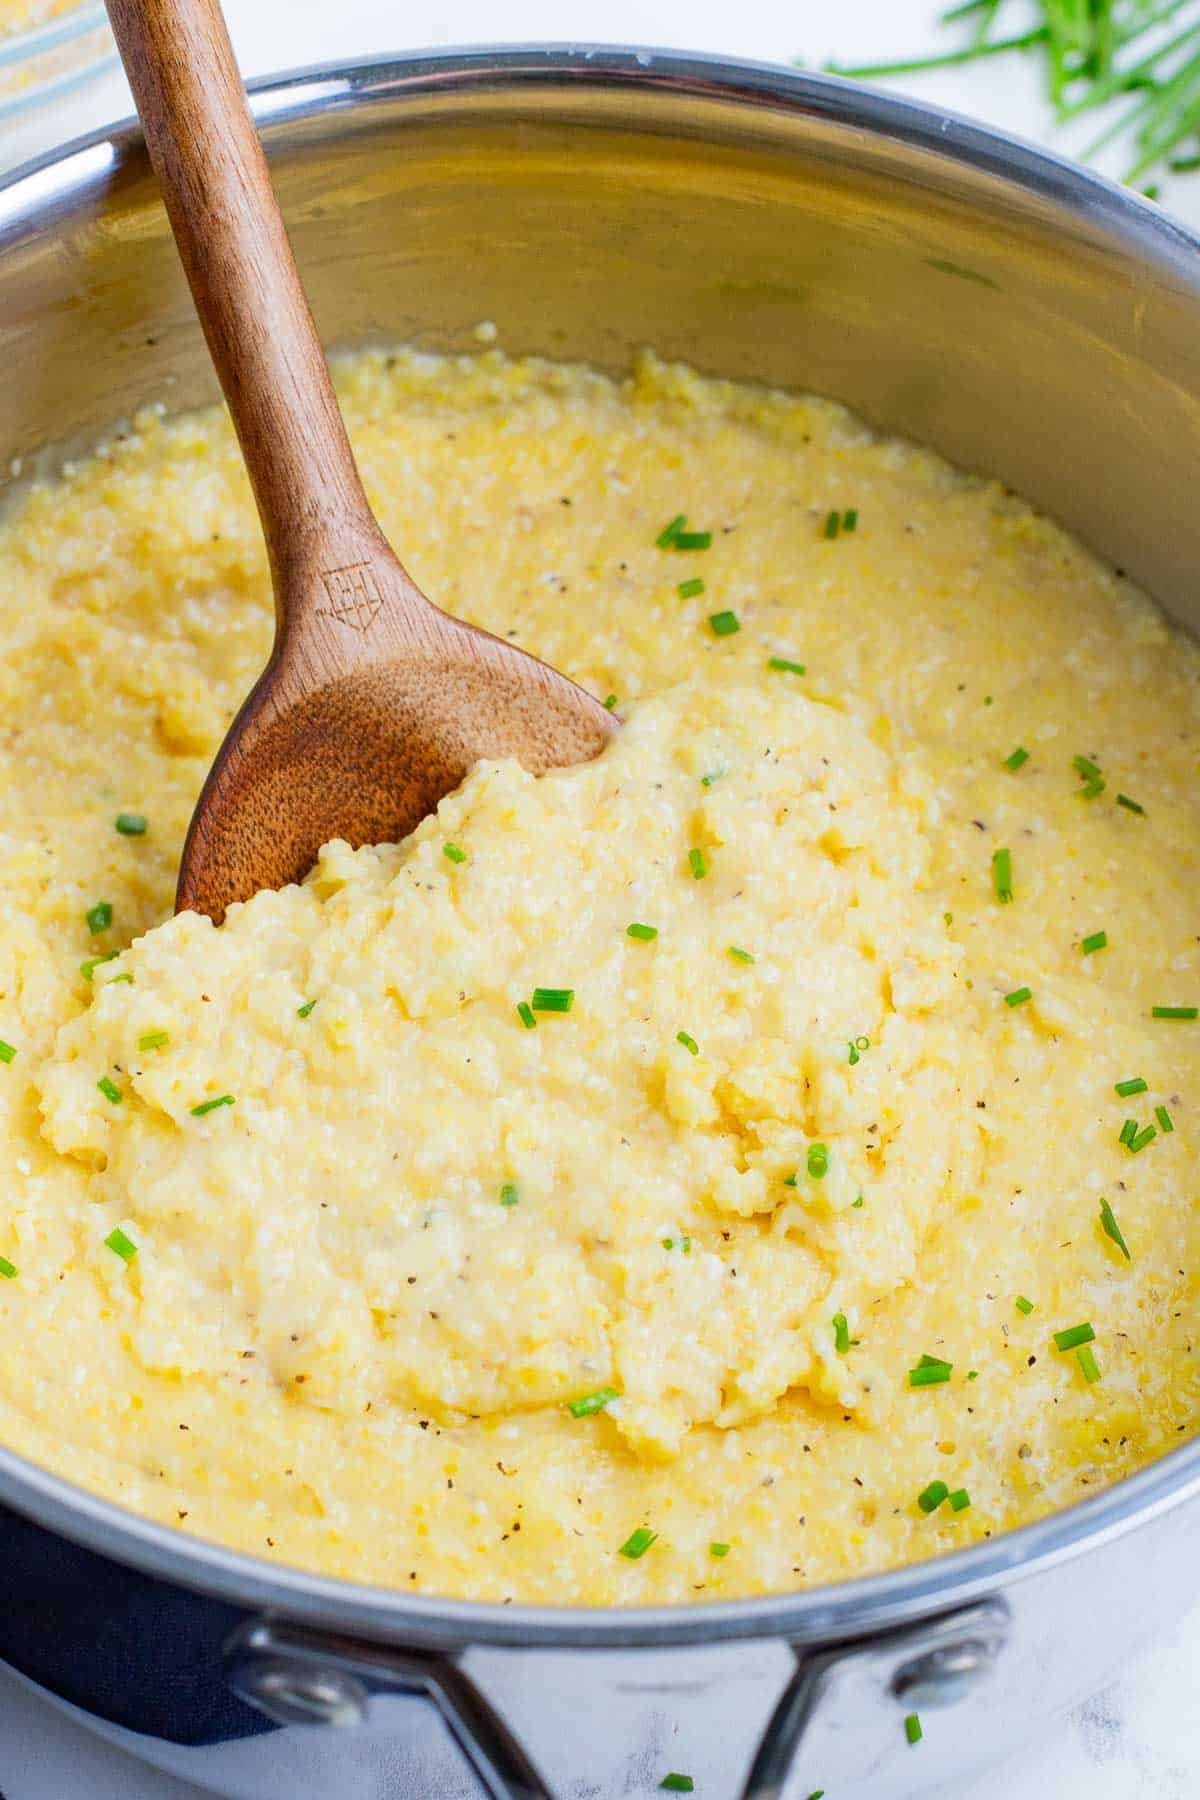 Cheesy gluten-free grits in a stainless steel pot with a wooden spoon.